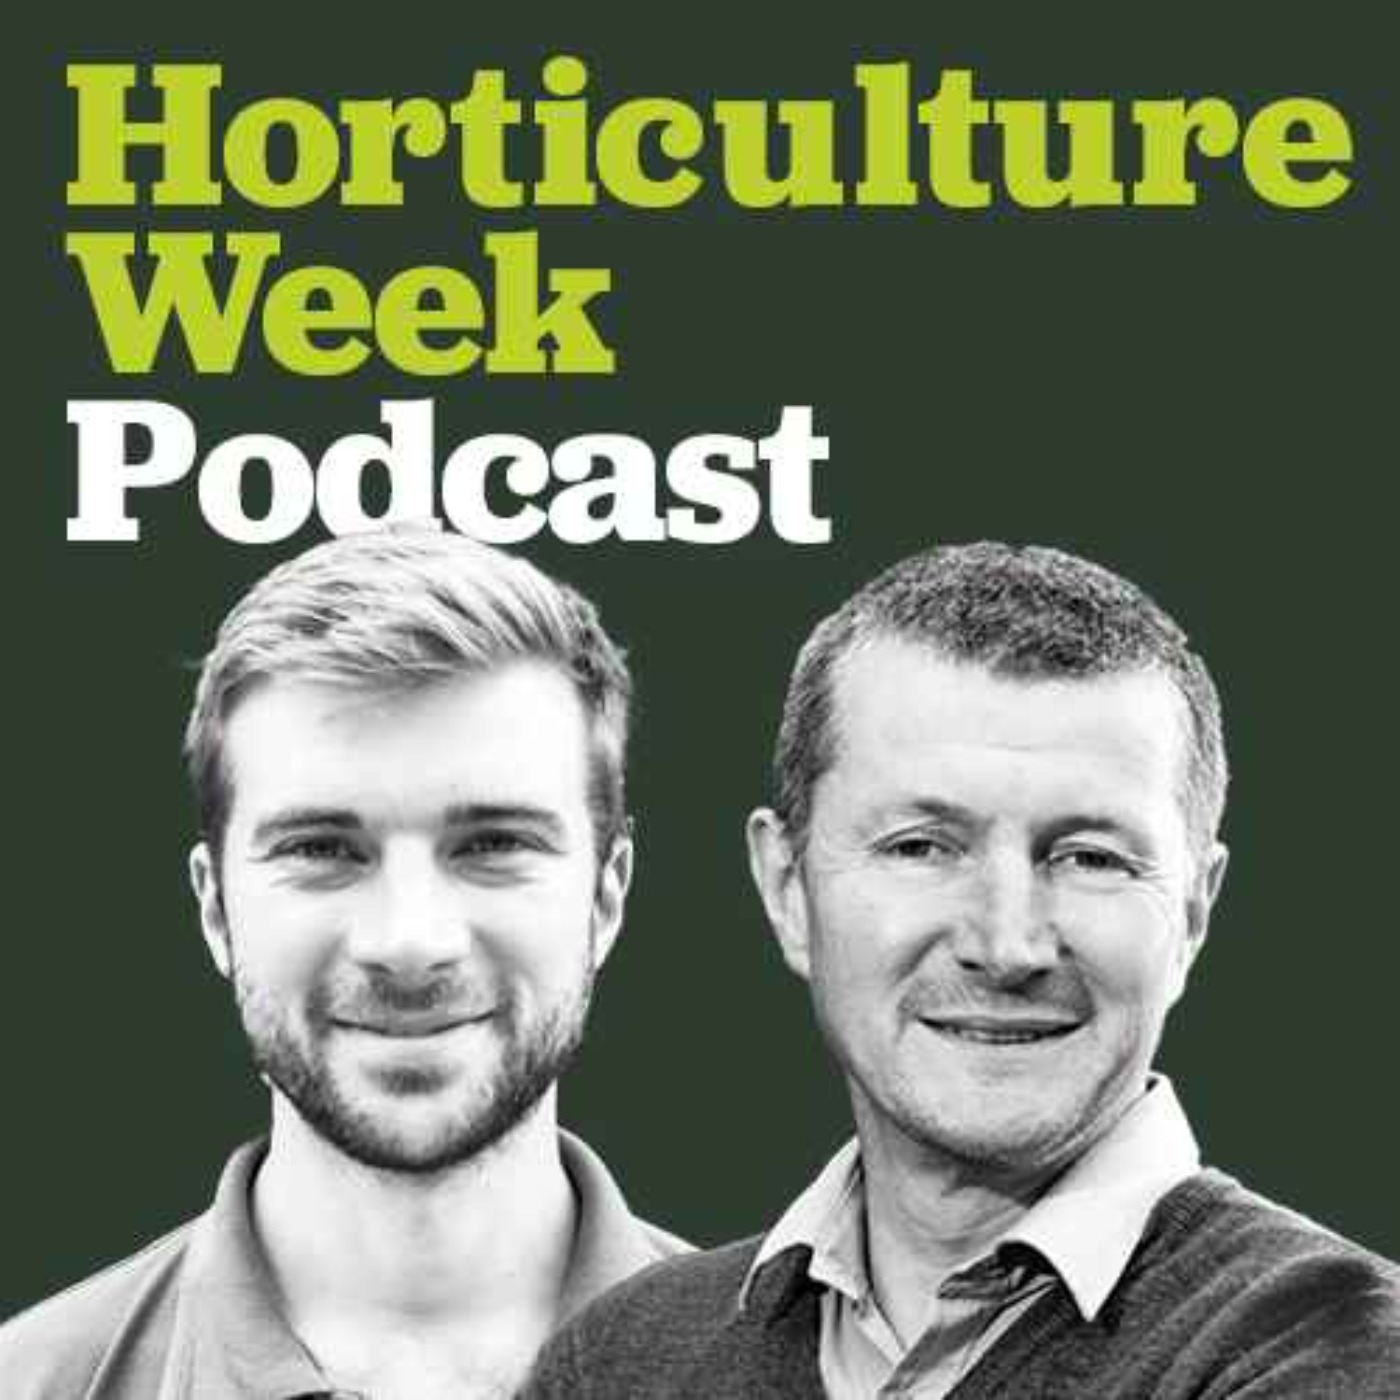 Award-winning tree grower Eliot Barden on peat, biosecurity and horticulture careers